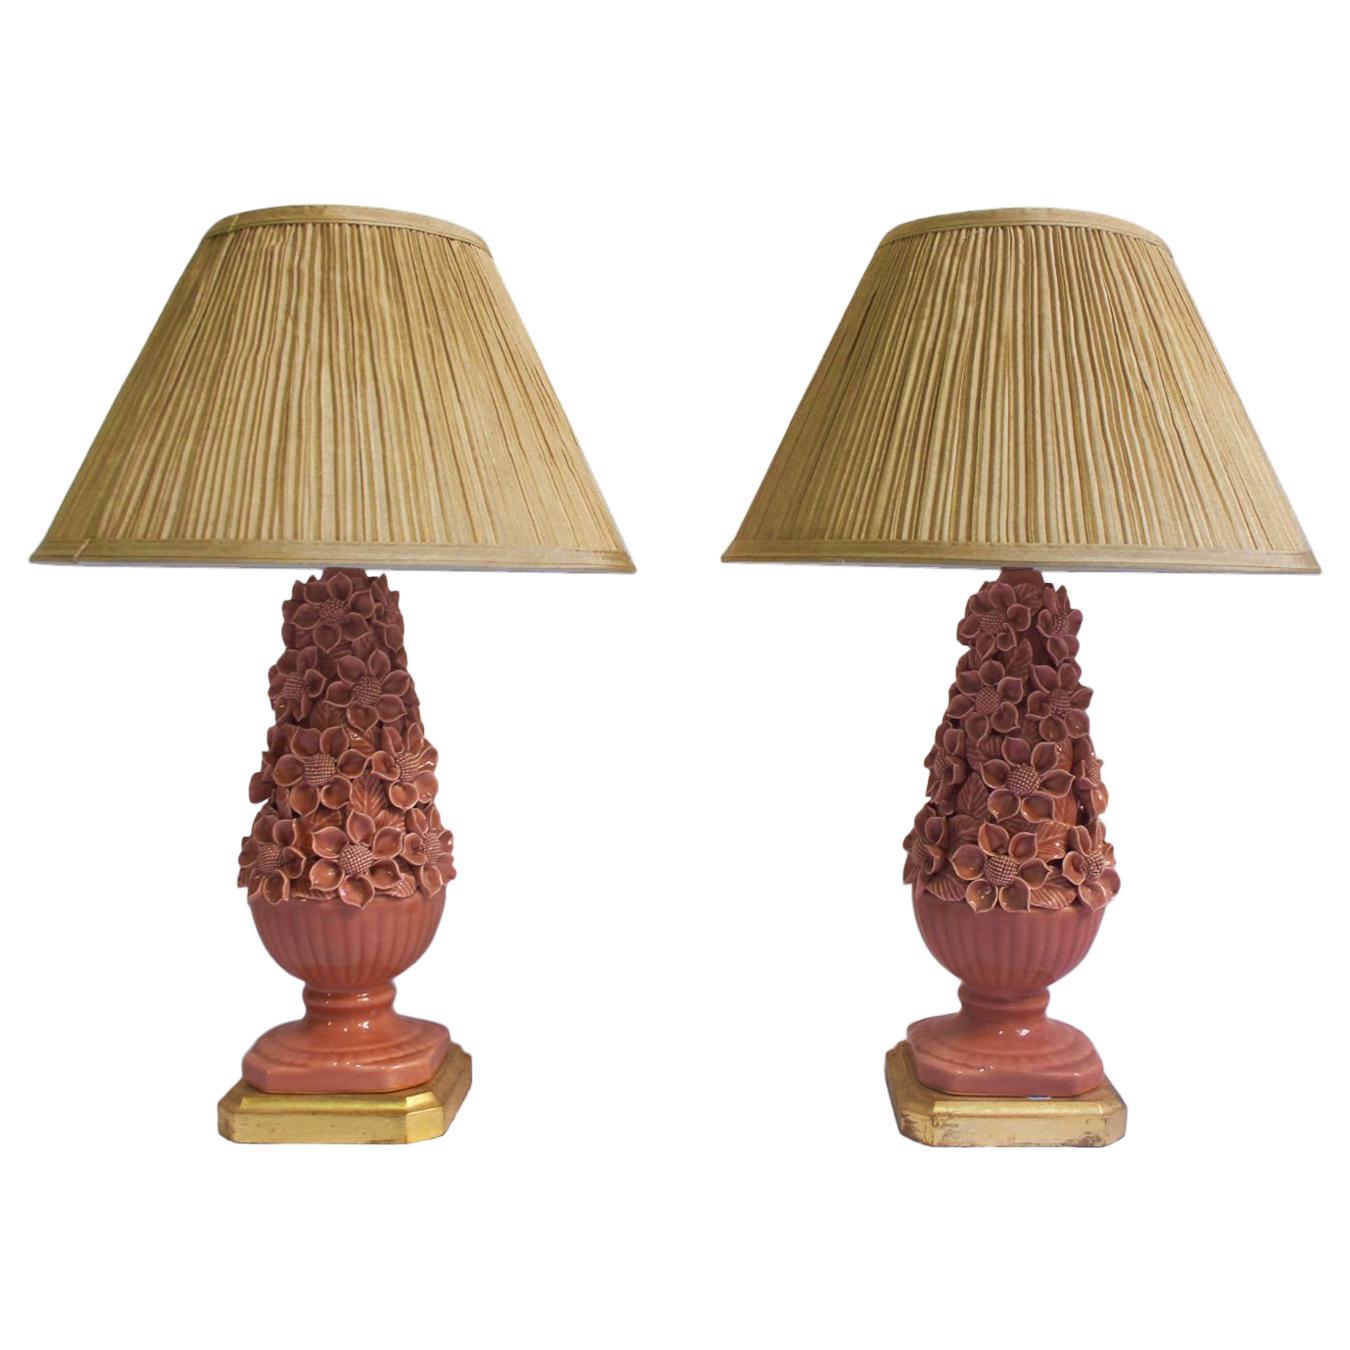 Set of 2 Ceramic Manises Flower Table Lamps in Salmon Color, 1950s For Sale